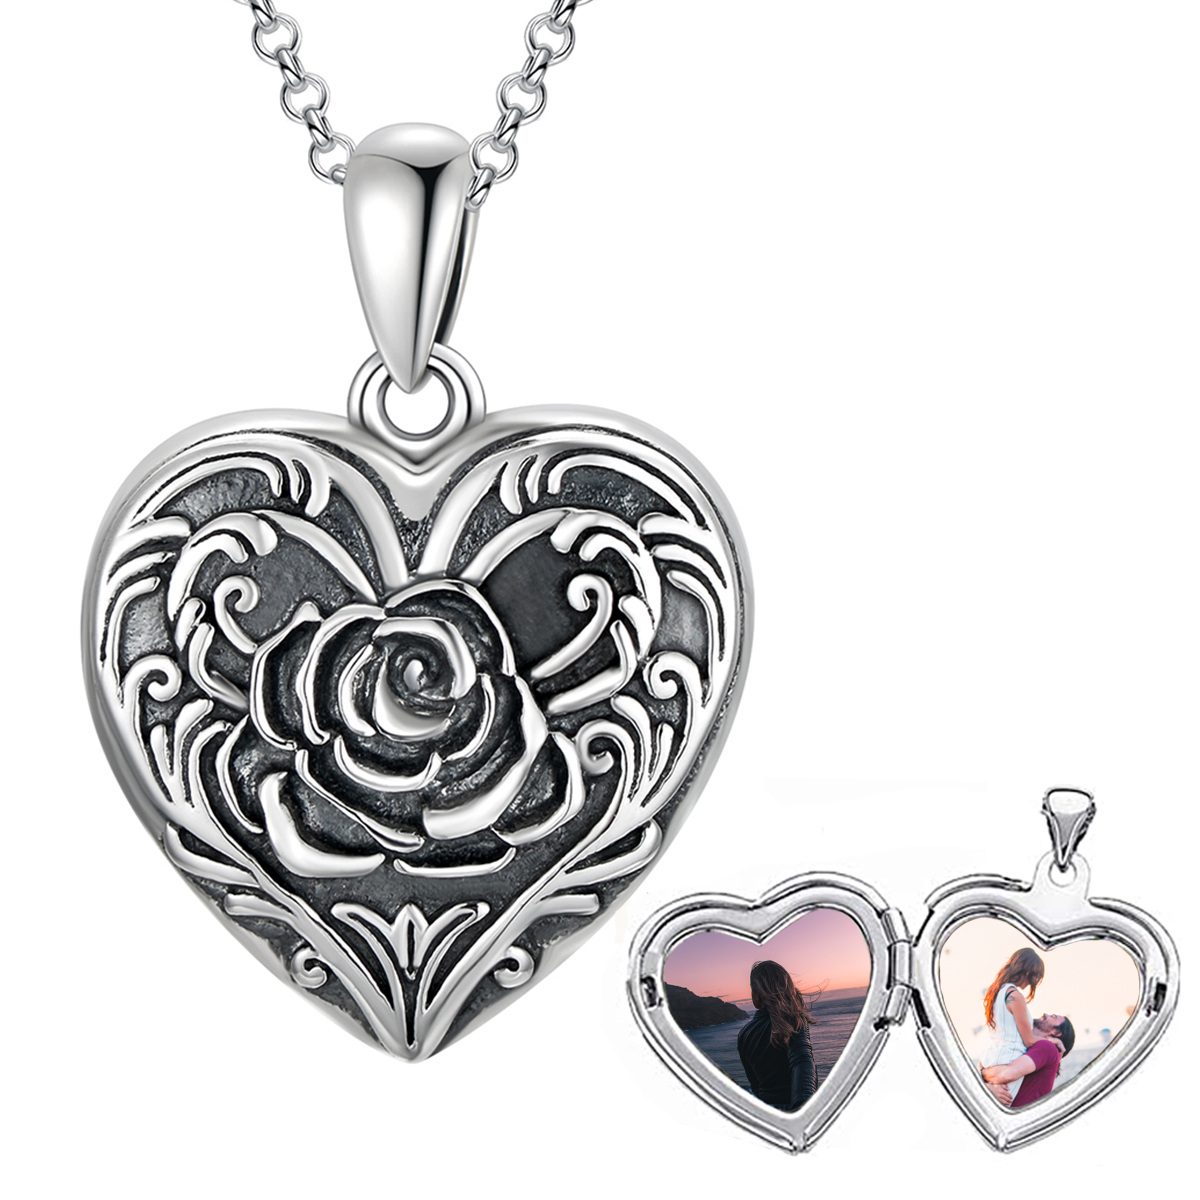 Sterling Silver Heart Pendant & Rose Personalized Engraving and Photo Locket Necklace-1